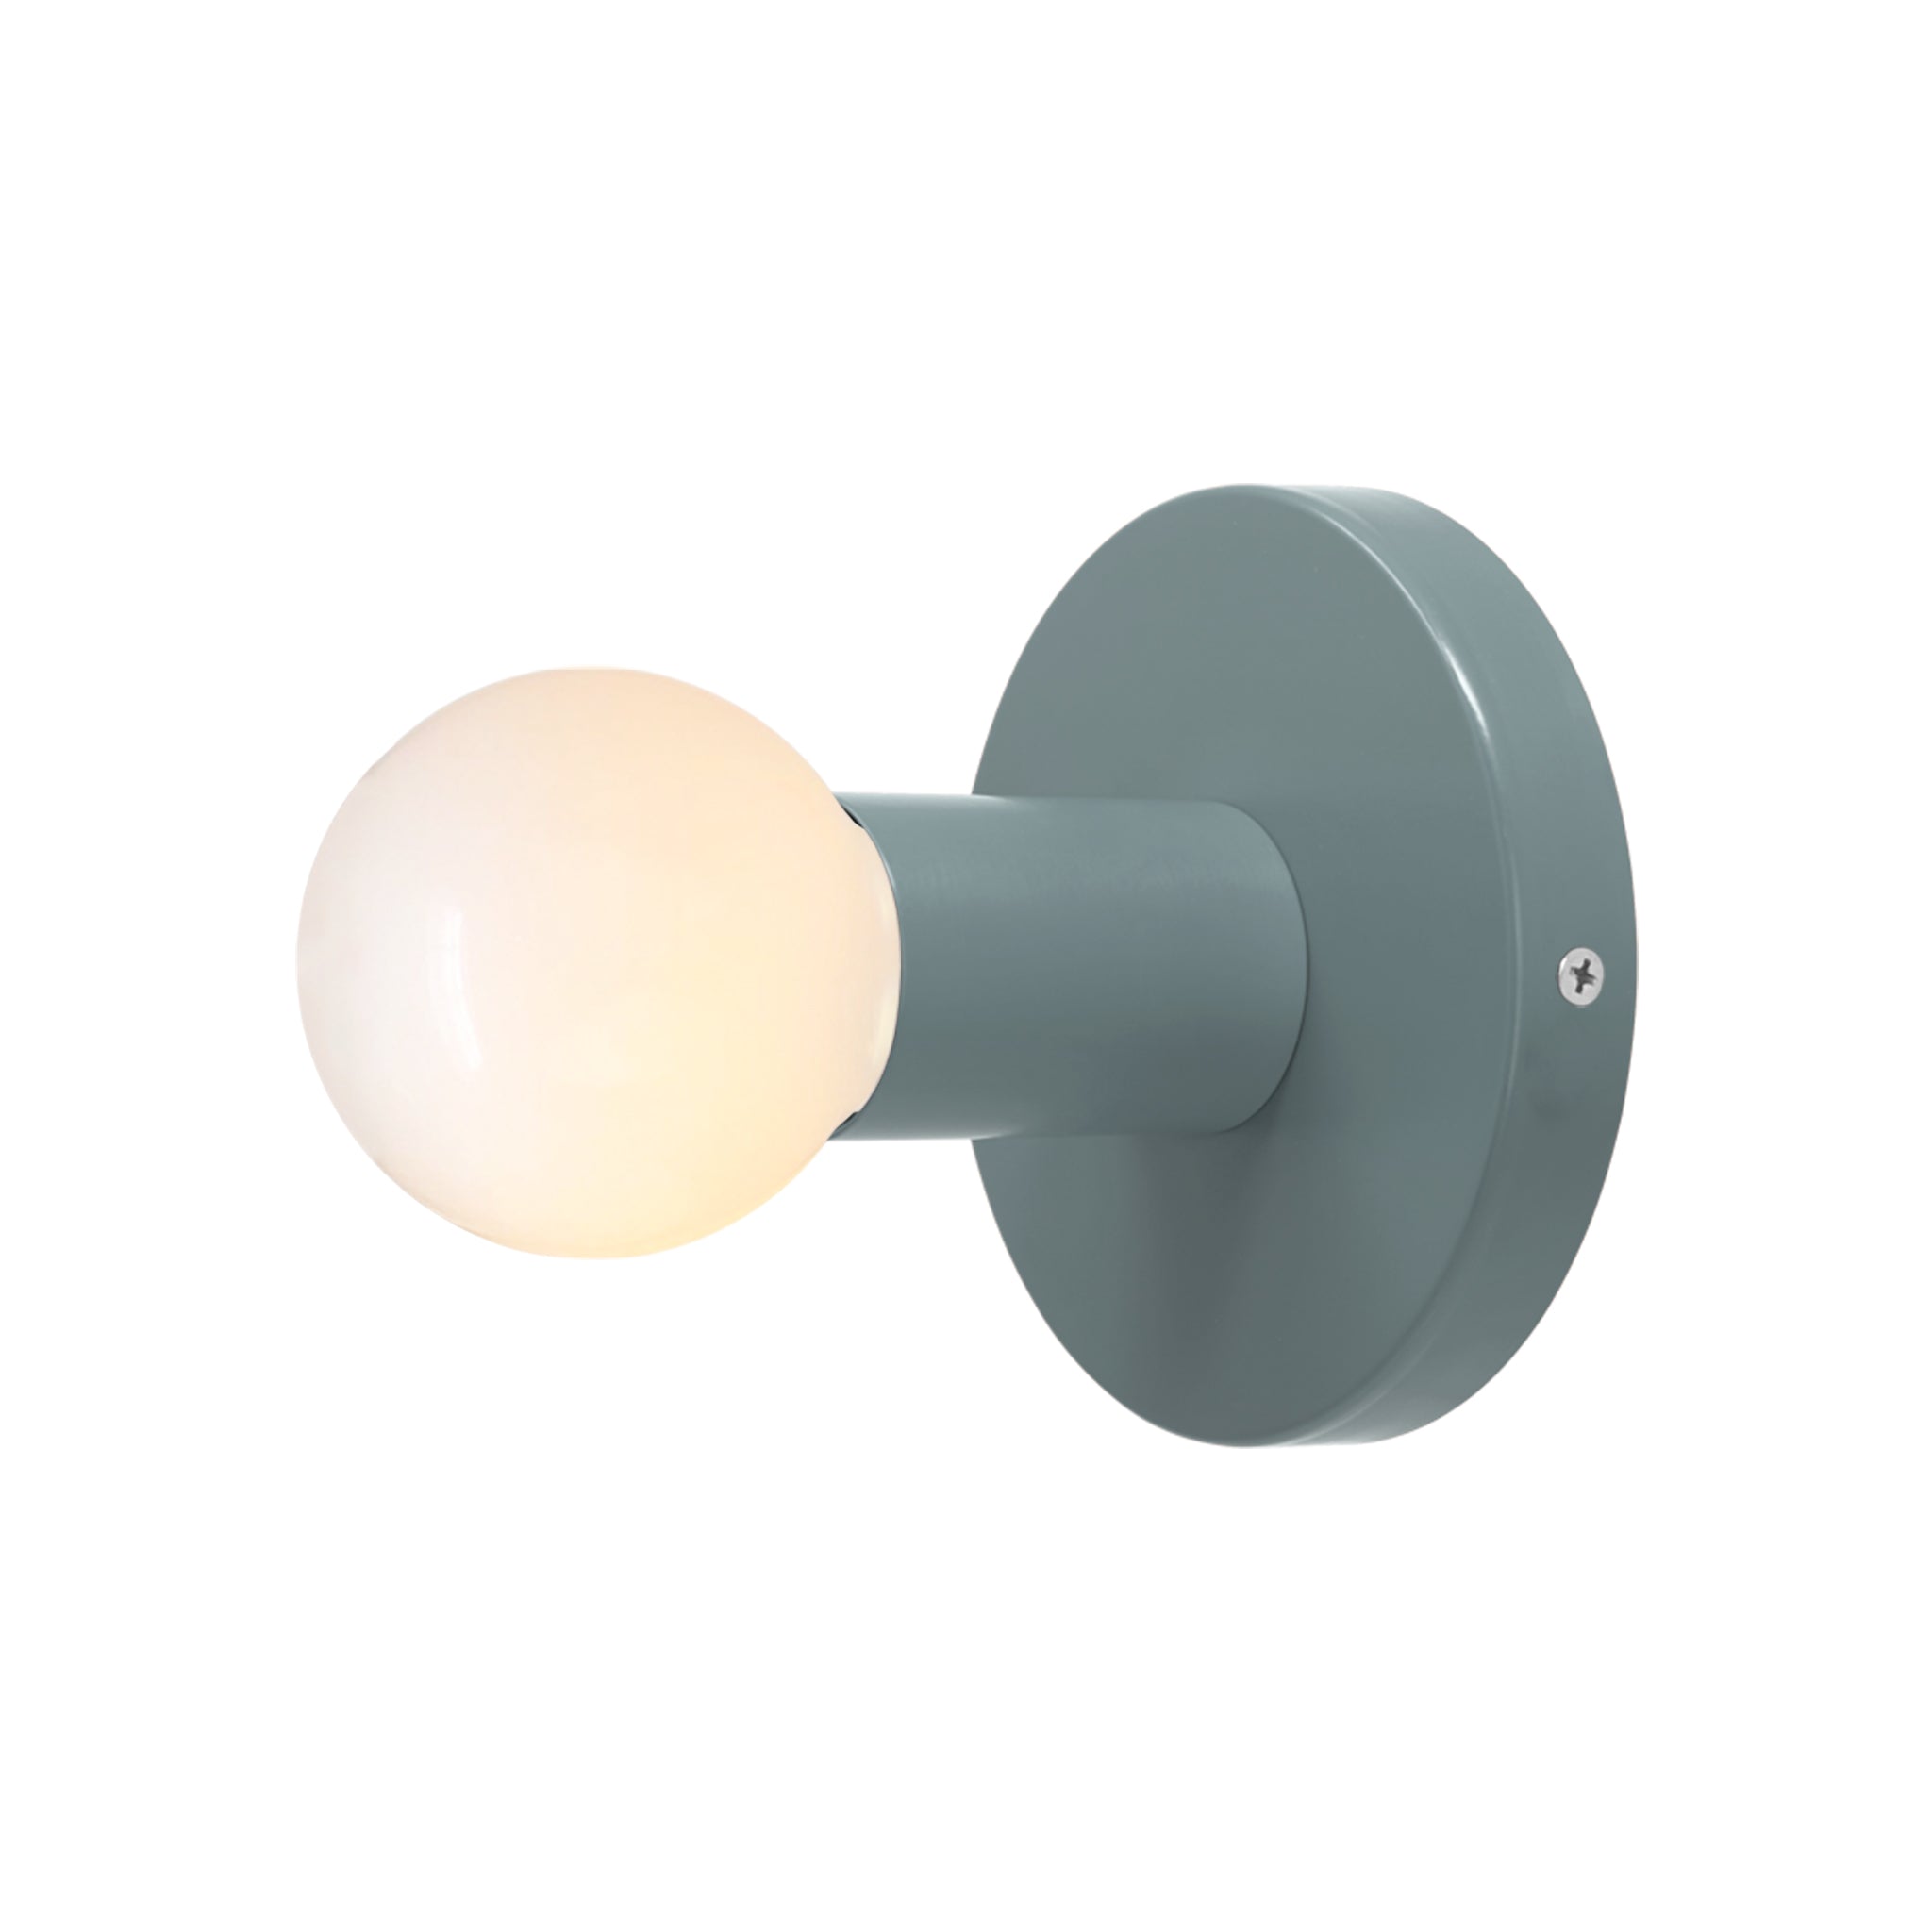 Nickel and python green color Twink sconce Dutton Brown lighting